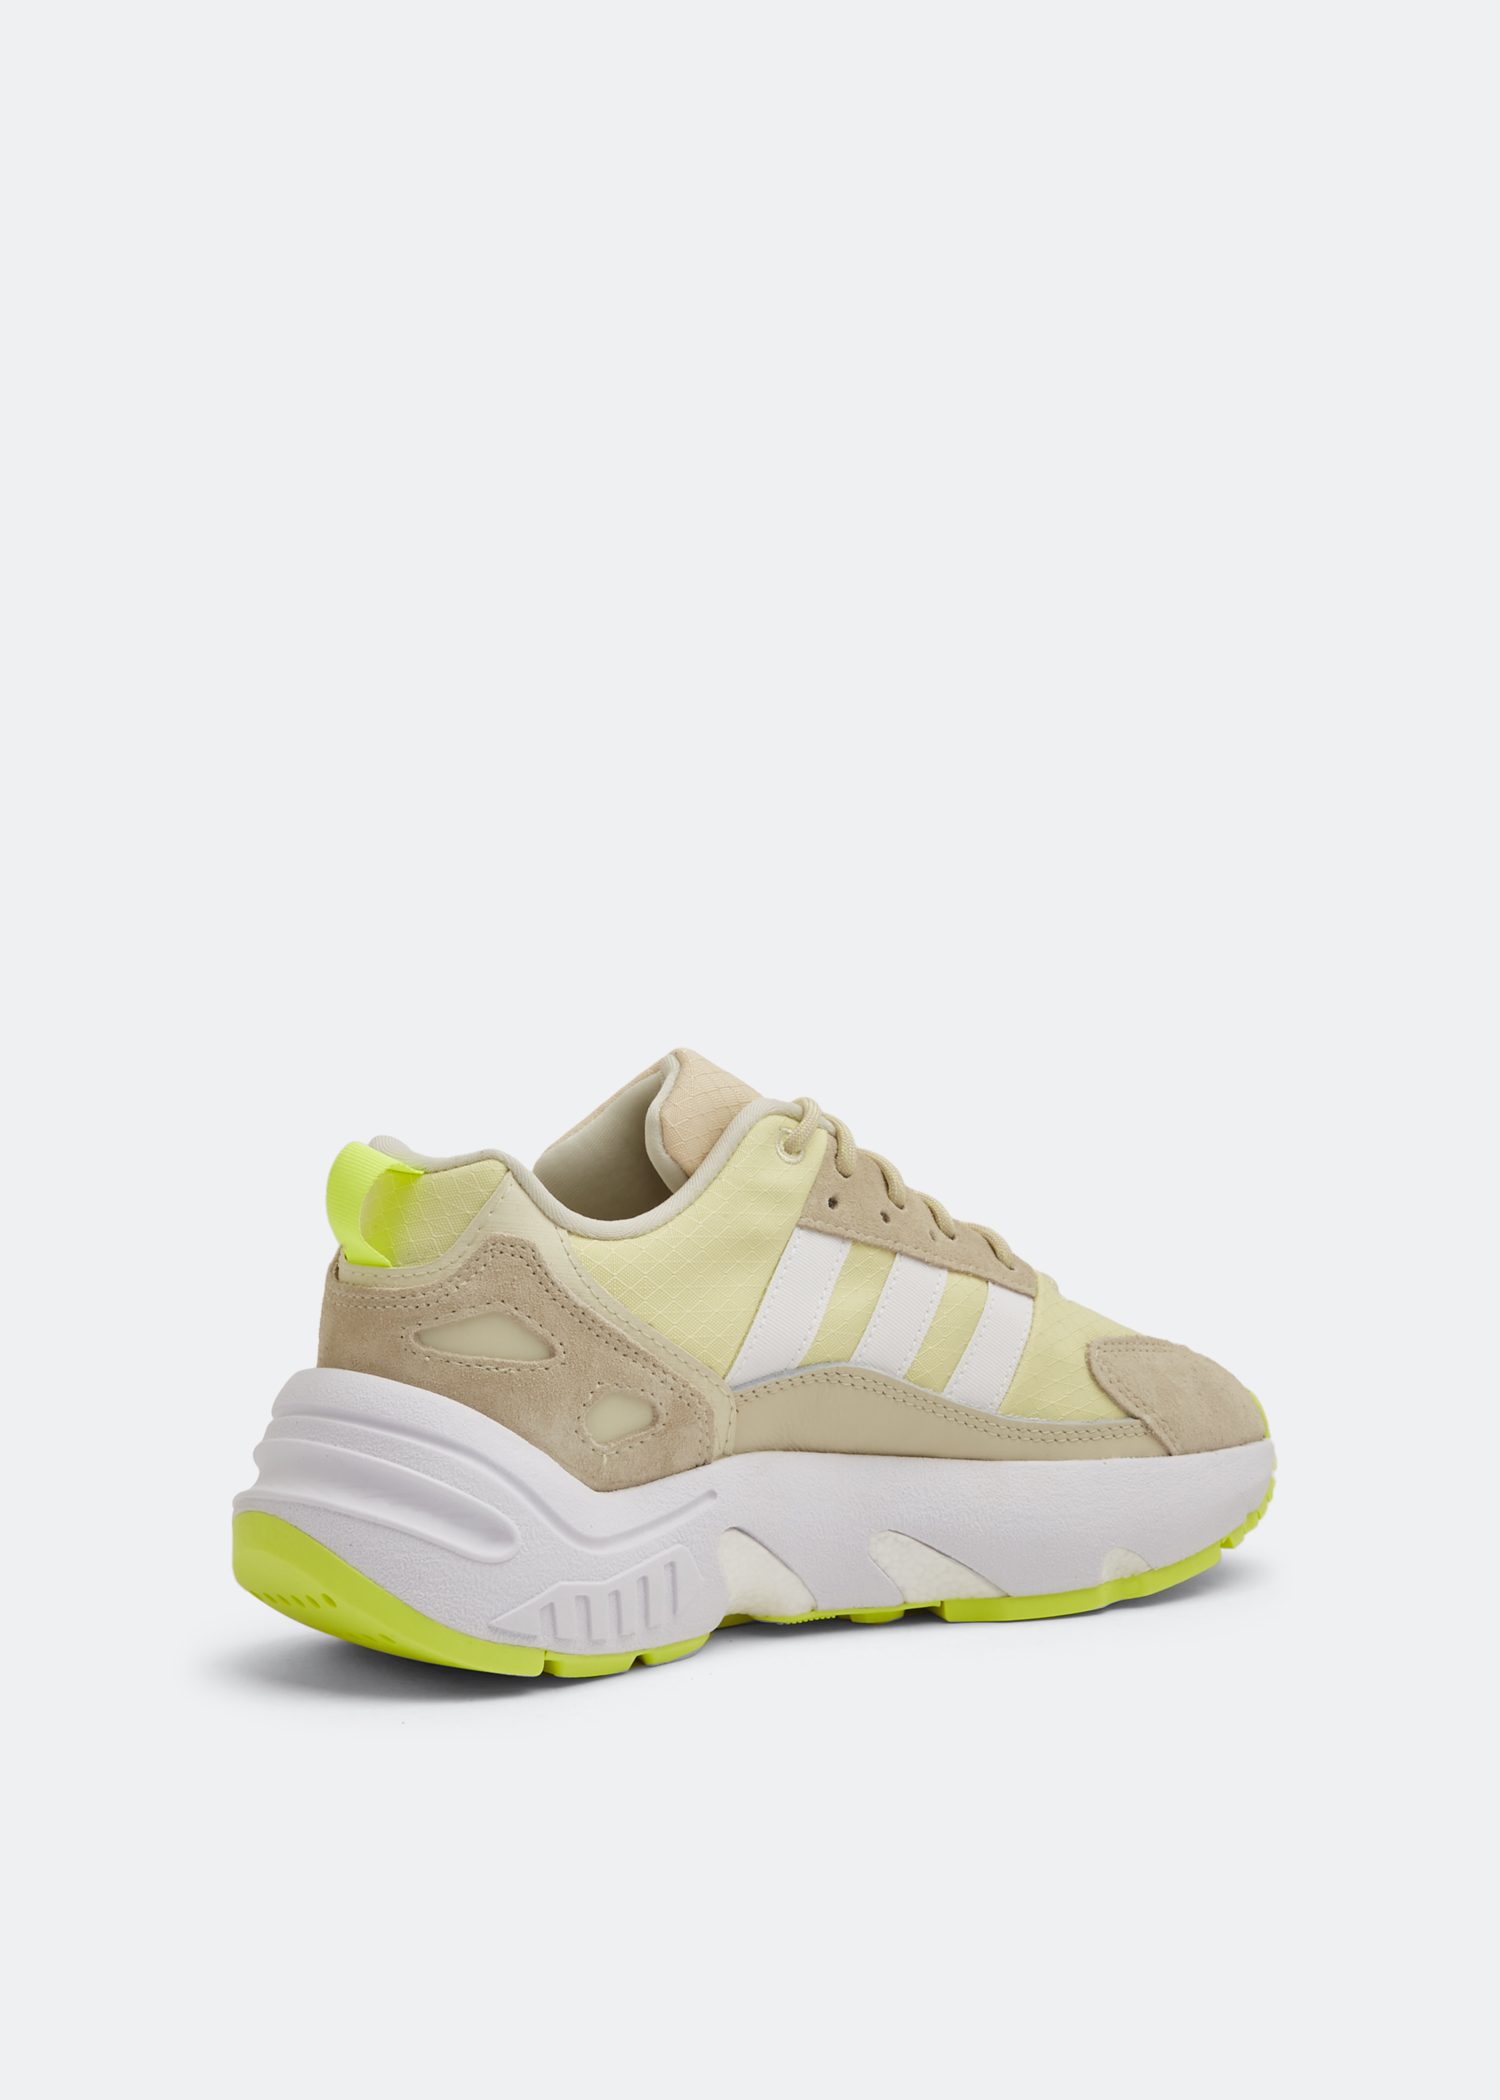 Adidas ZX 22 Boost sneakers for Women - Yellow in KSA | Level Shoes